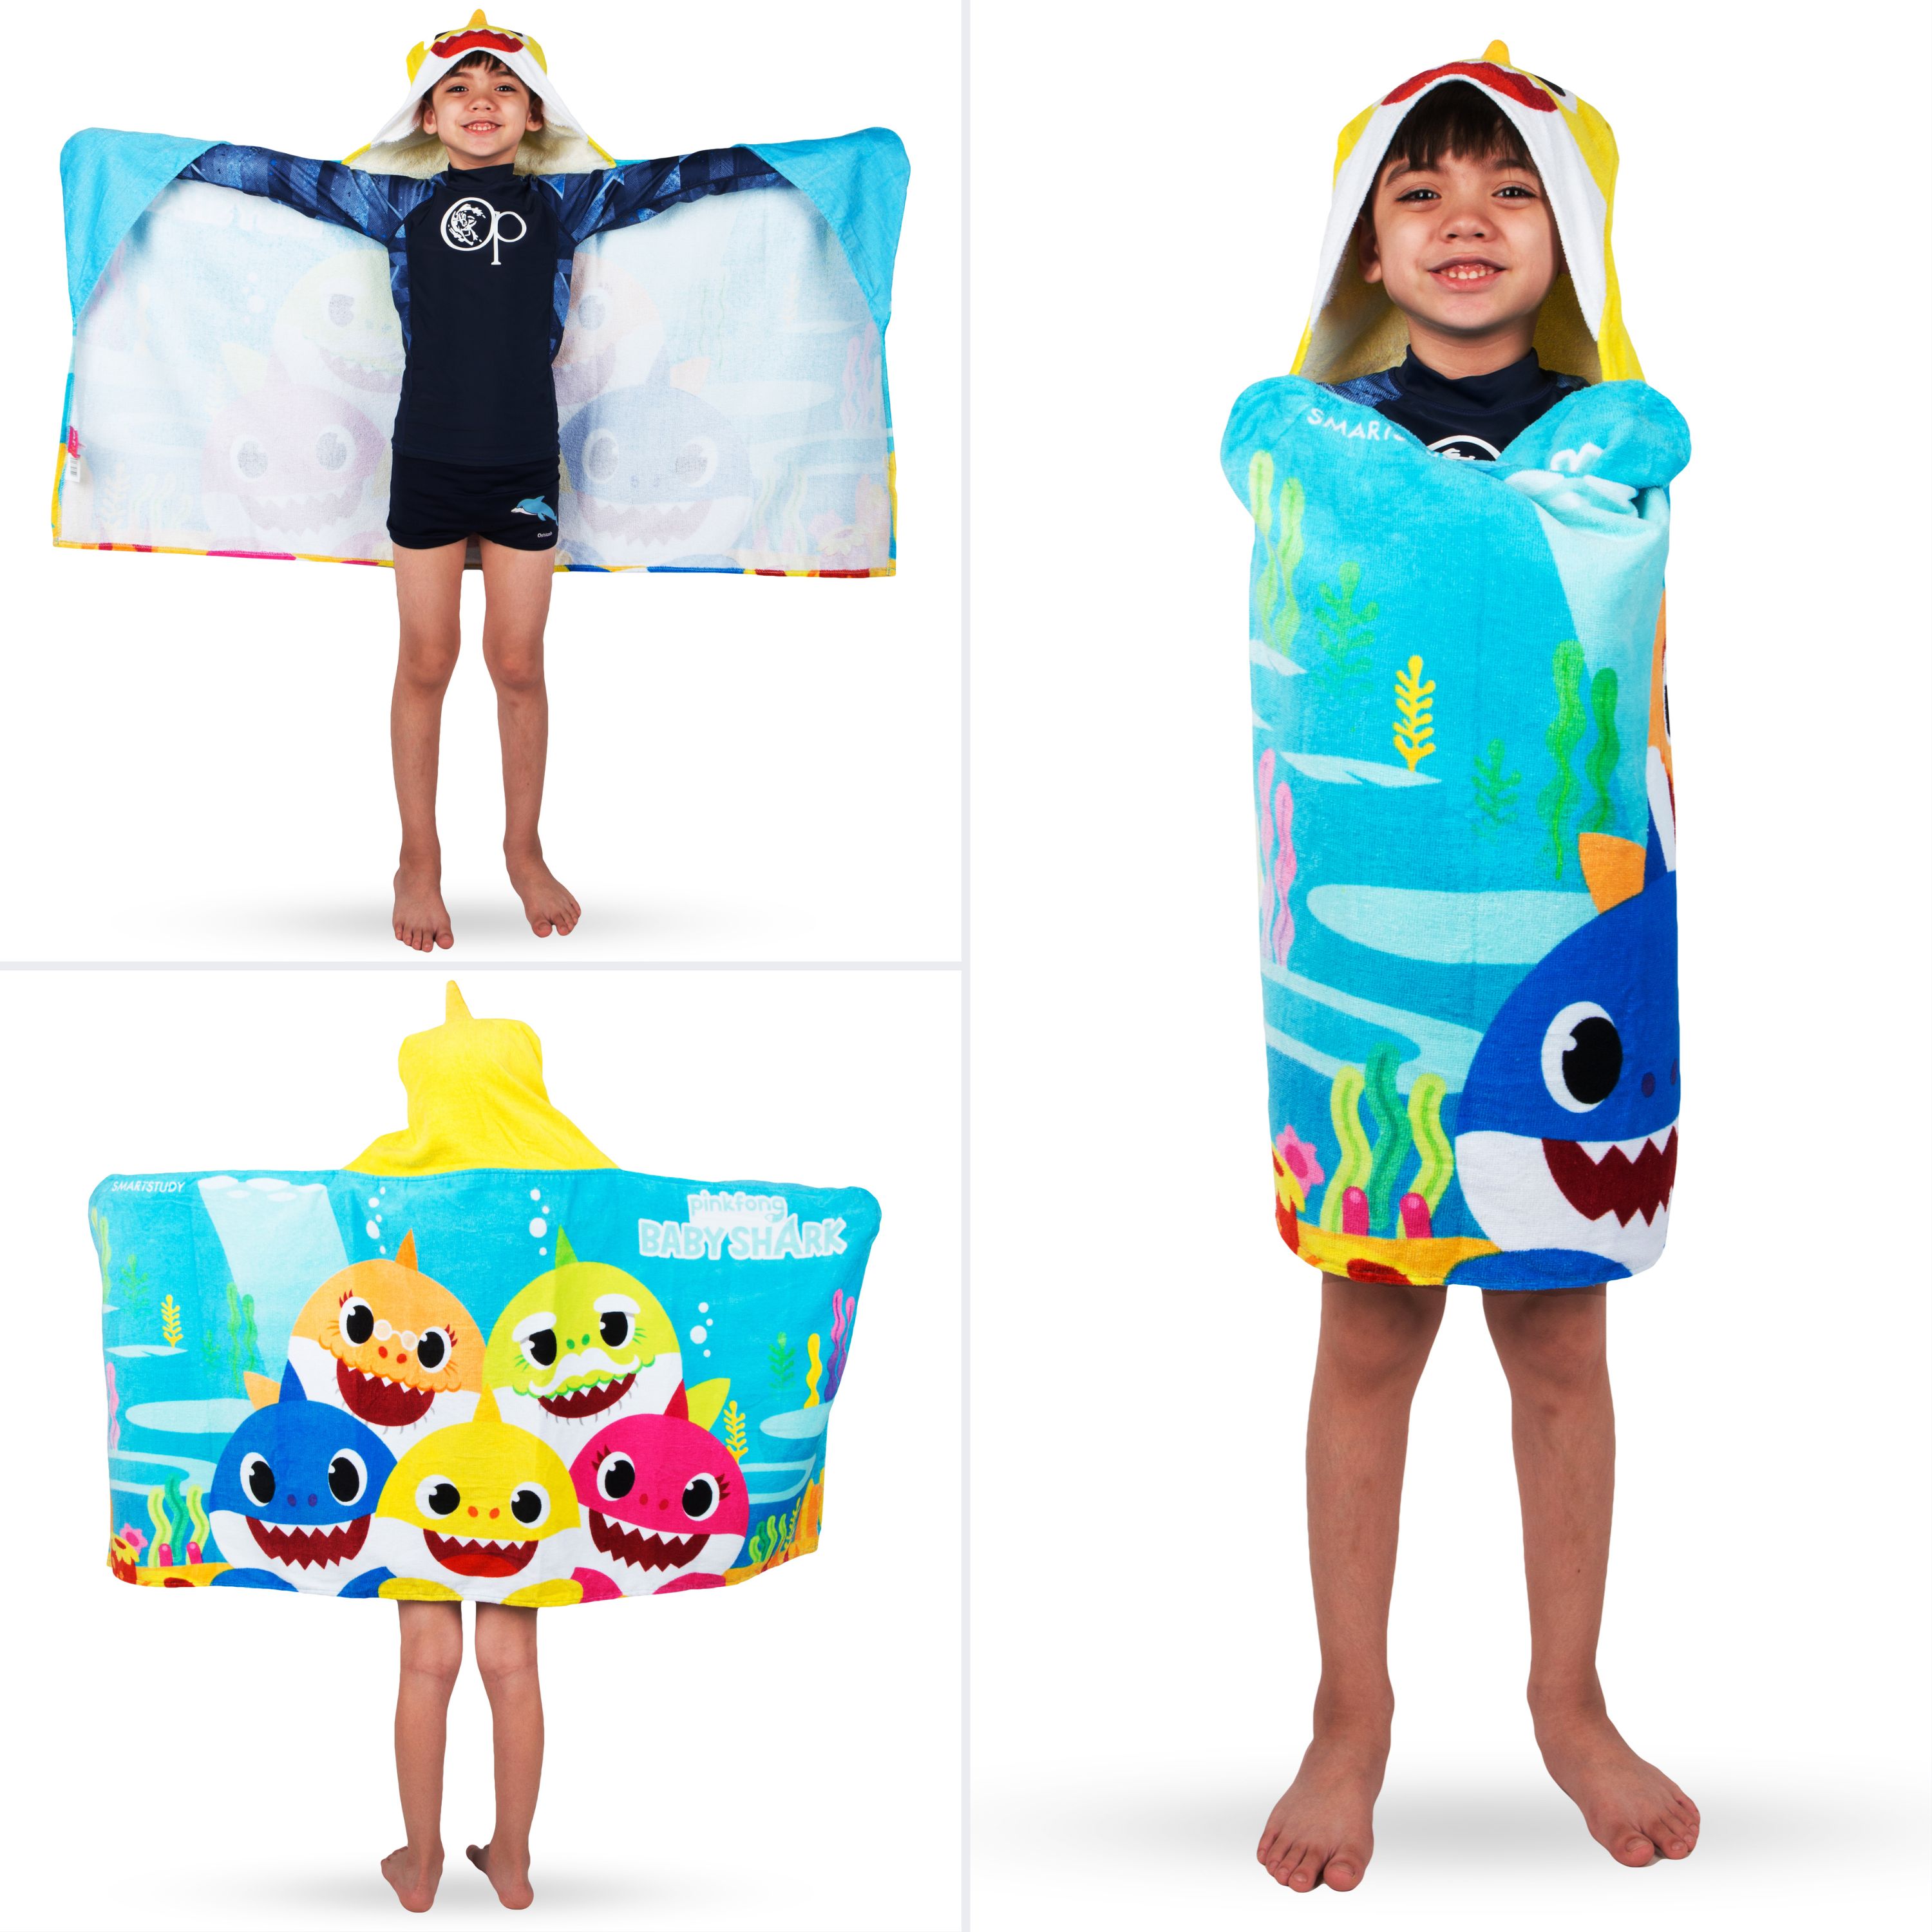 Baby Shark Kids Cotton Hooded Towel - image 2 of 6